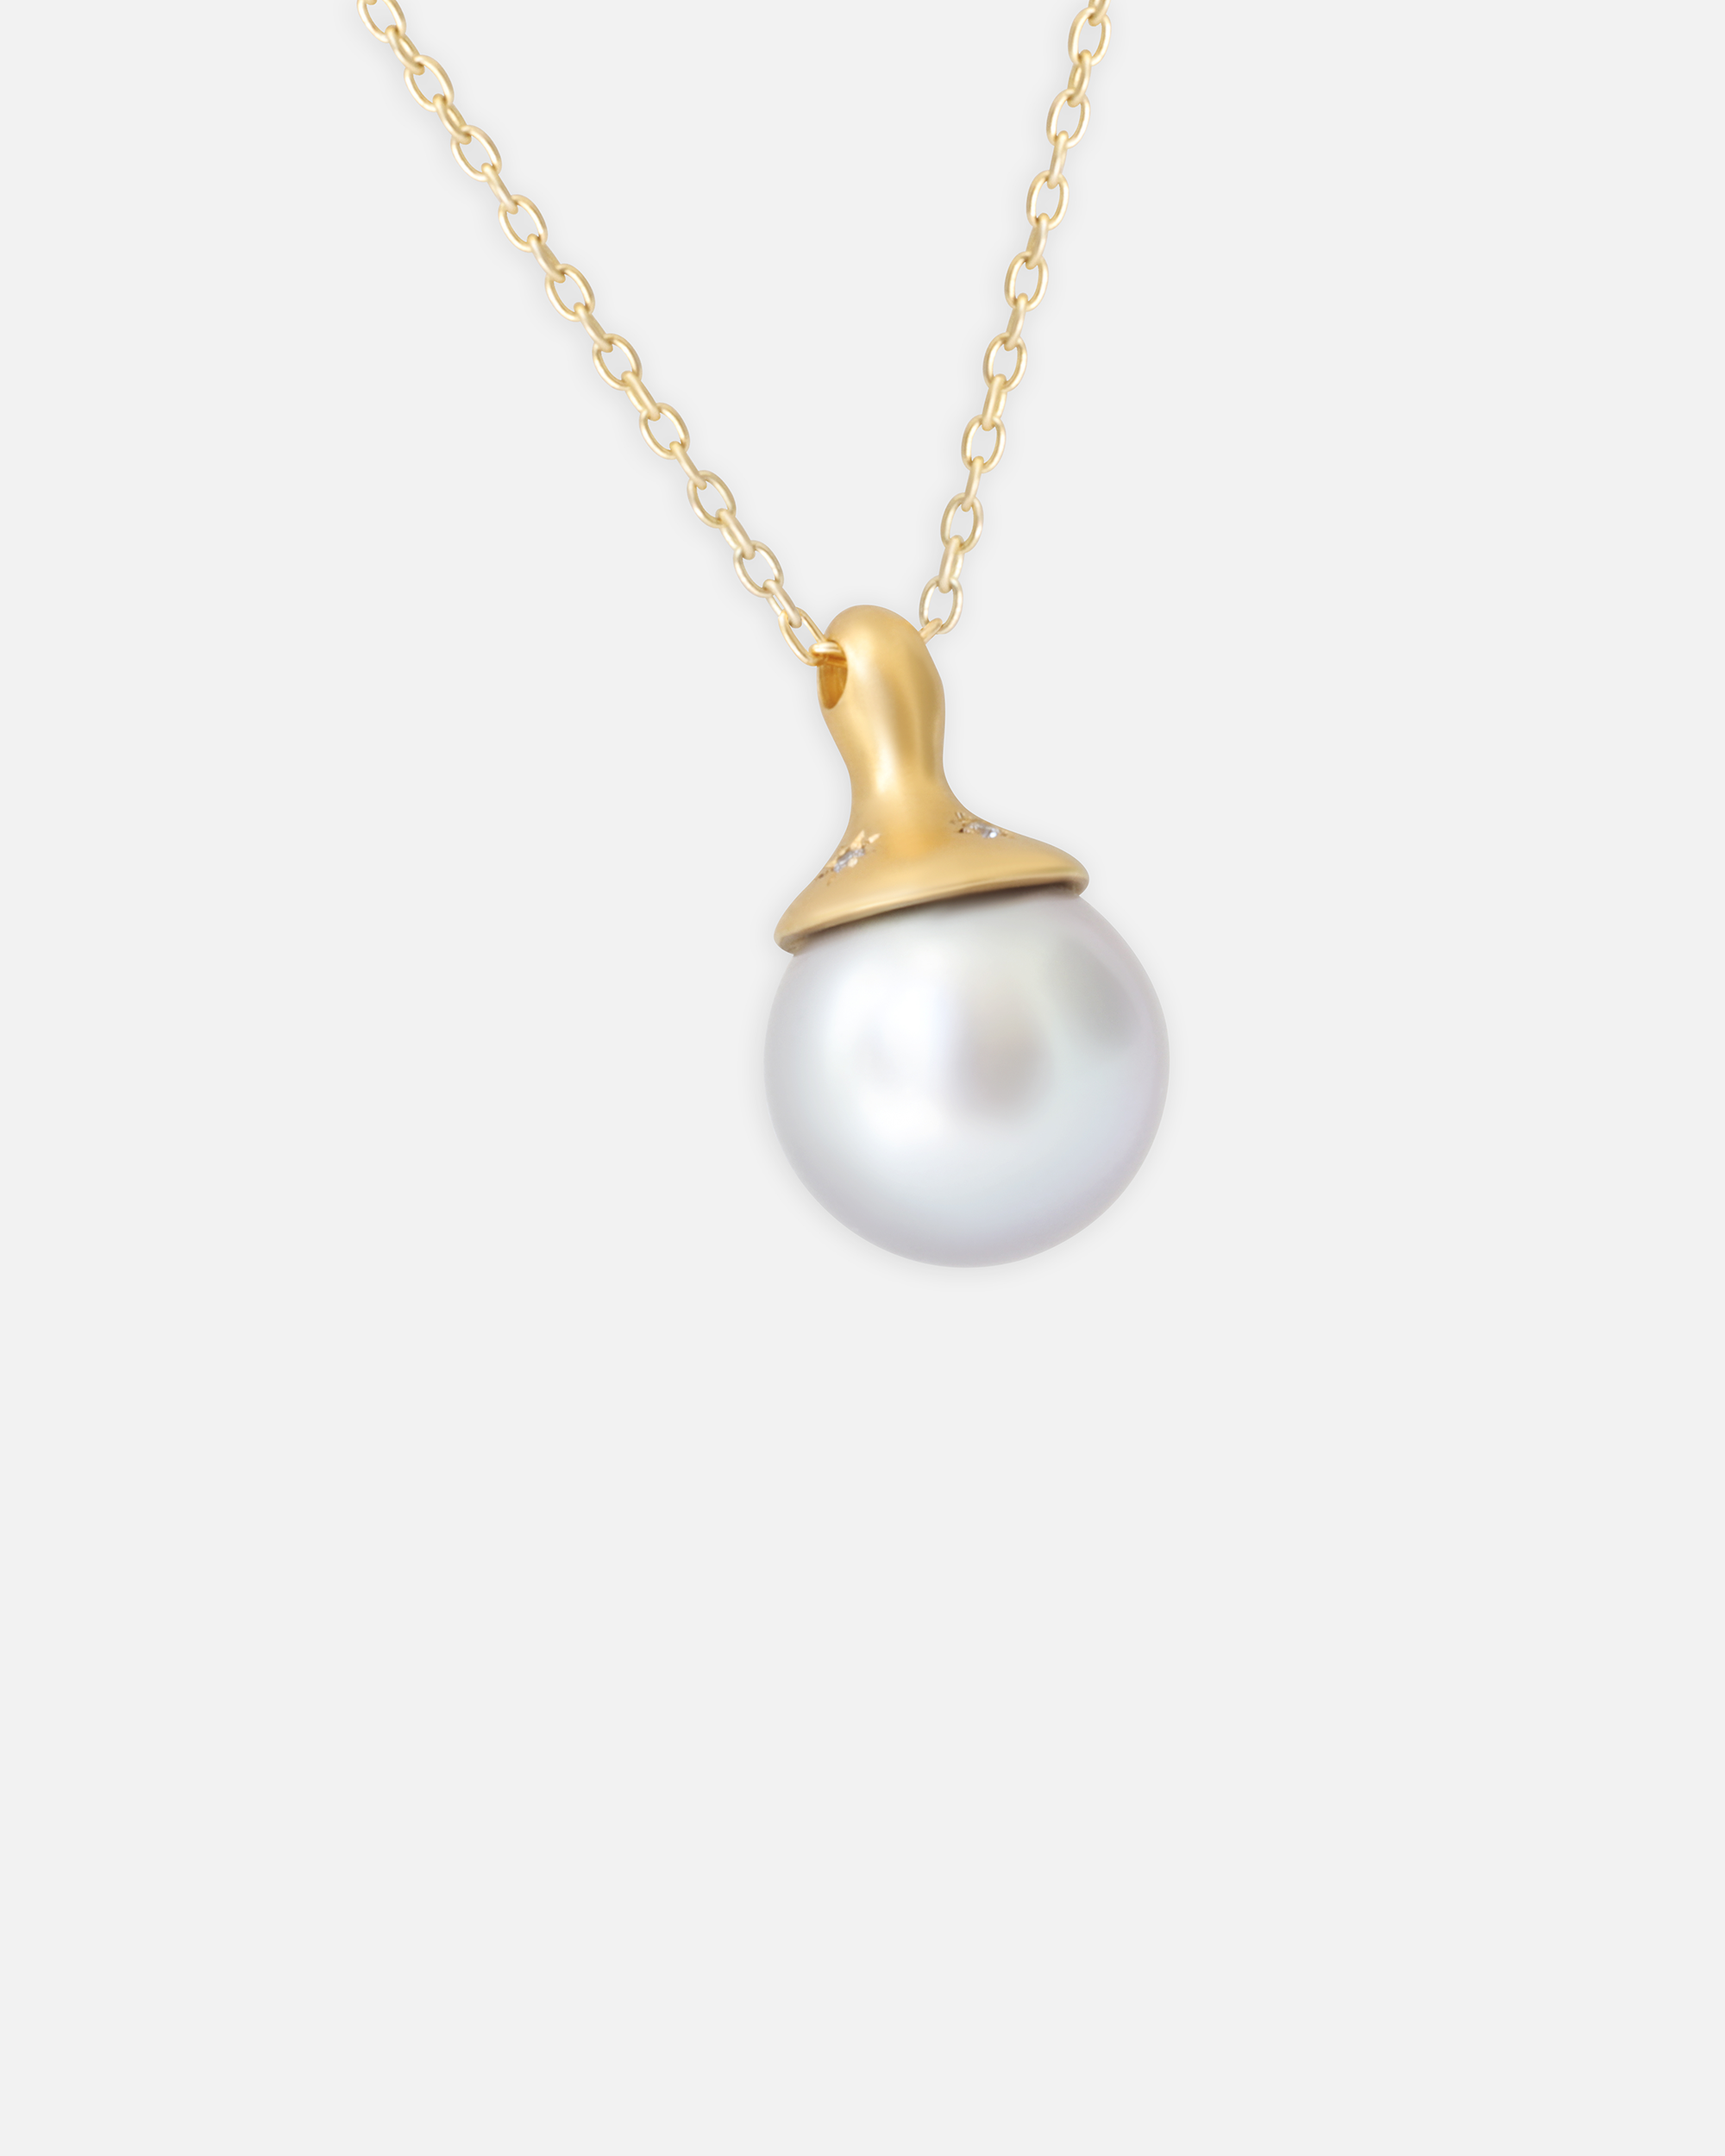 Umi / Black South Sea Pearl Pendant By Hiroyo in pendants Category